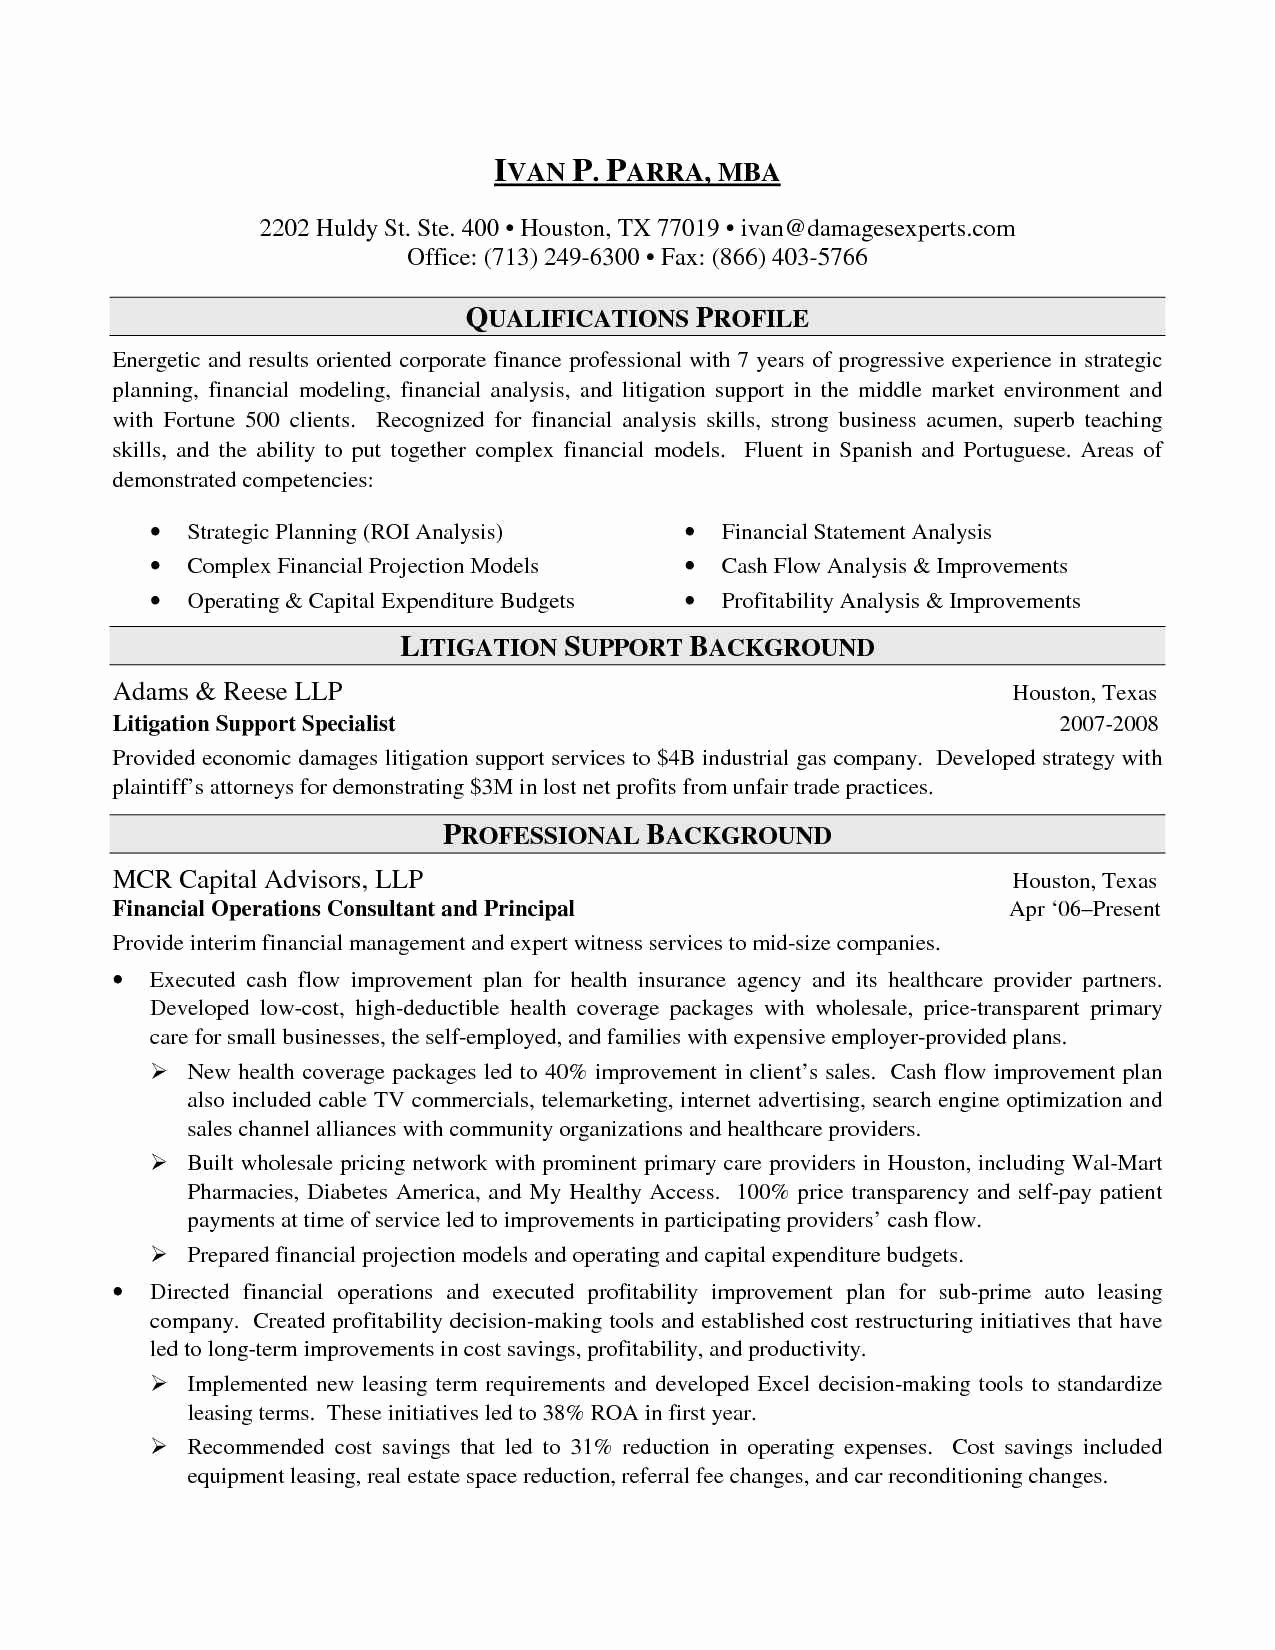 Investment Banking Resume Template Fresh Investment Banking Resume India Bongdaao